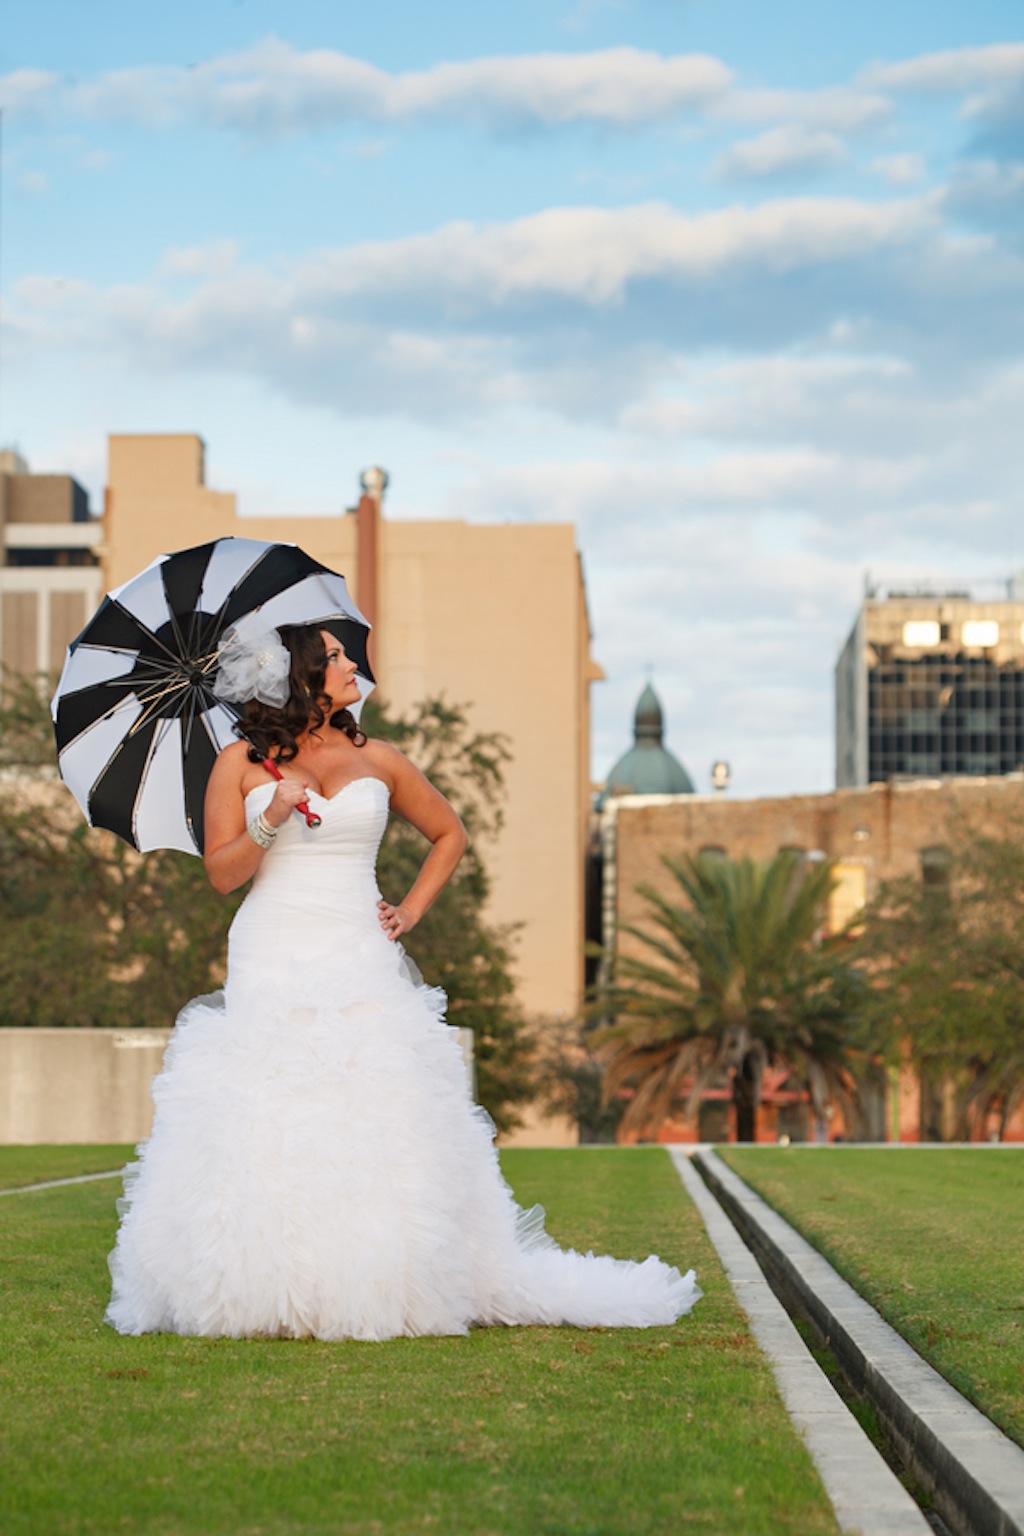 Tampa Museum of Art Wedding Modern Carnival Wedding - Tampa Wedding Photographer Carrie Wildes Photography (11)